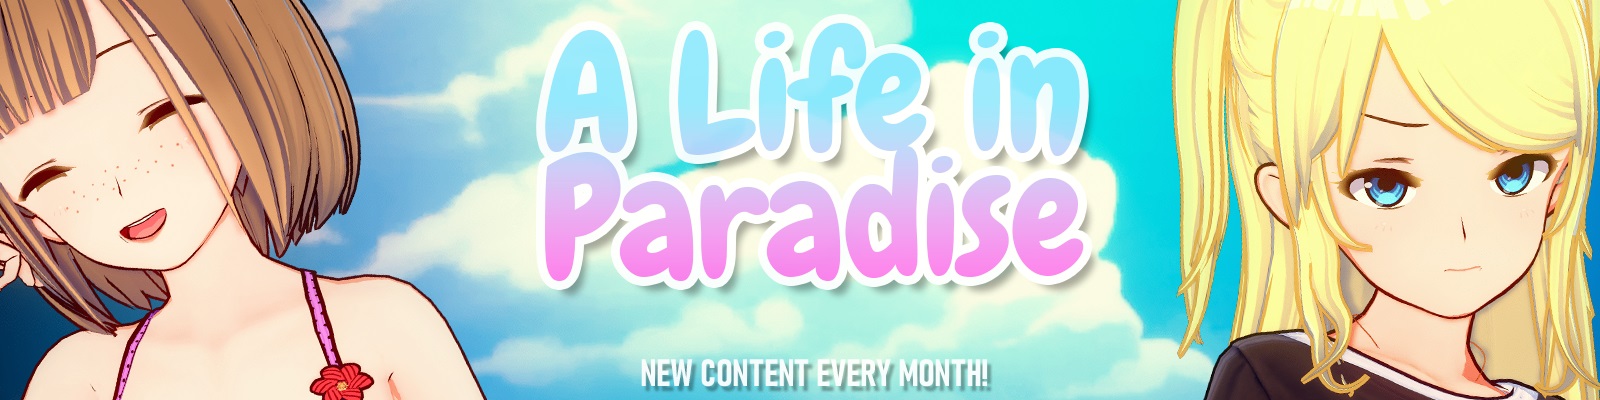 A Life in Paradise1.jpg